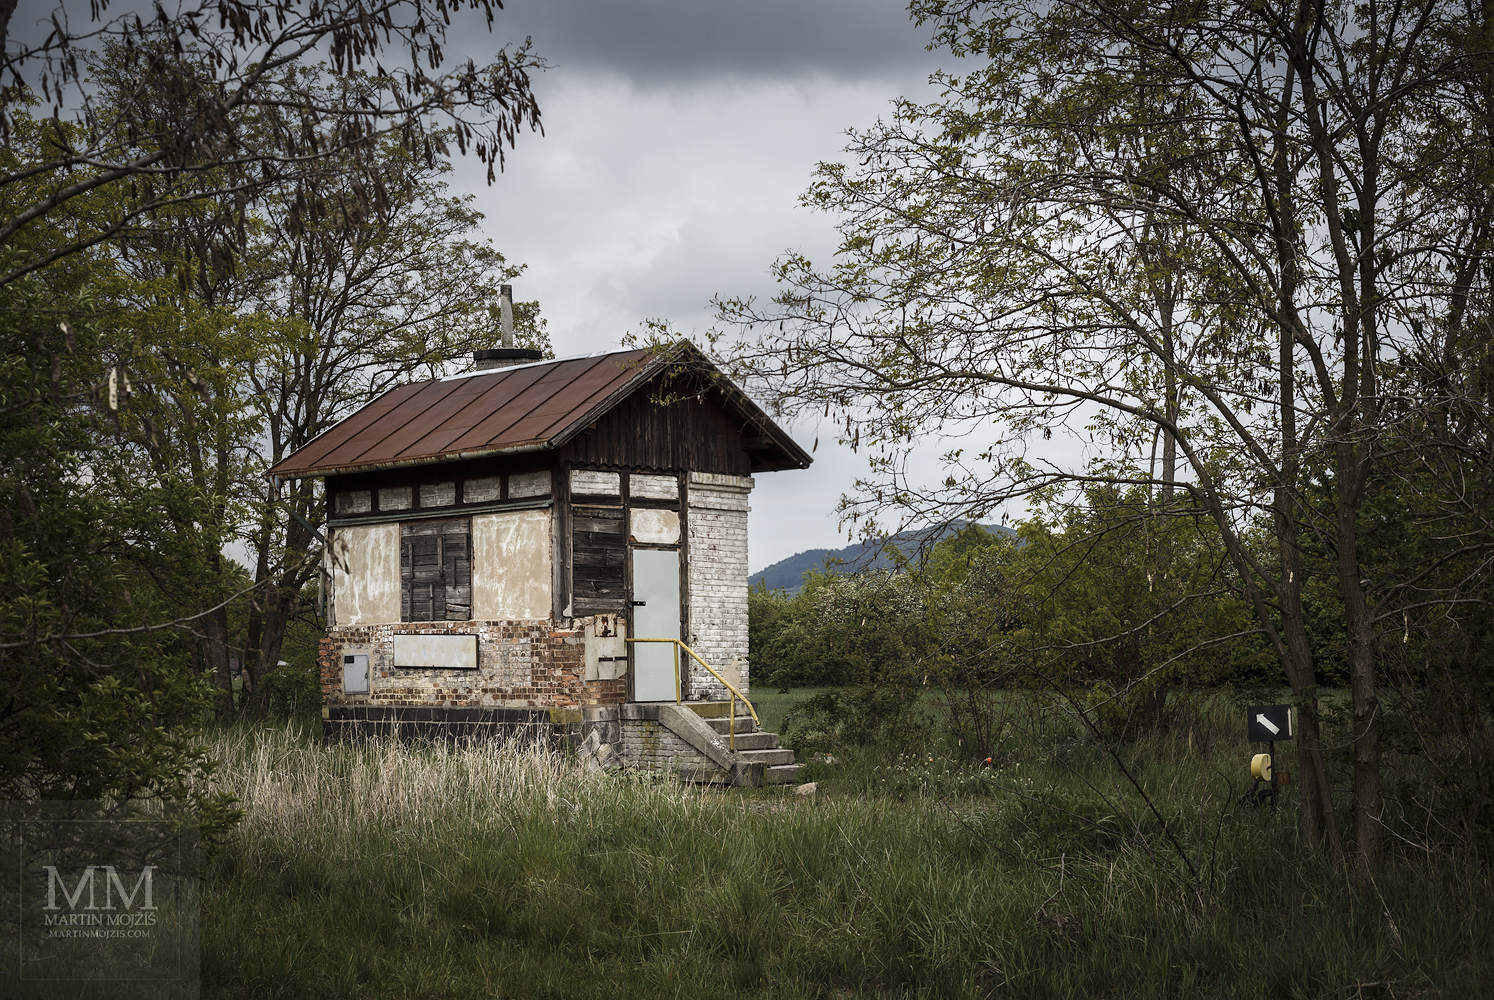 Fine Art photograph of the old small railway house. Martin Mojzis.